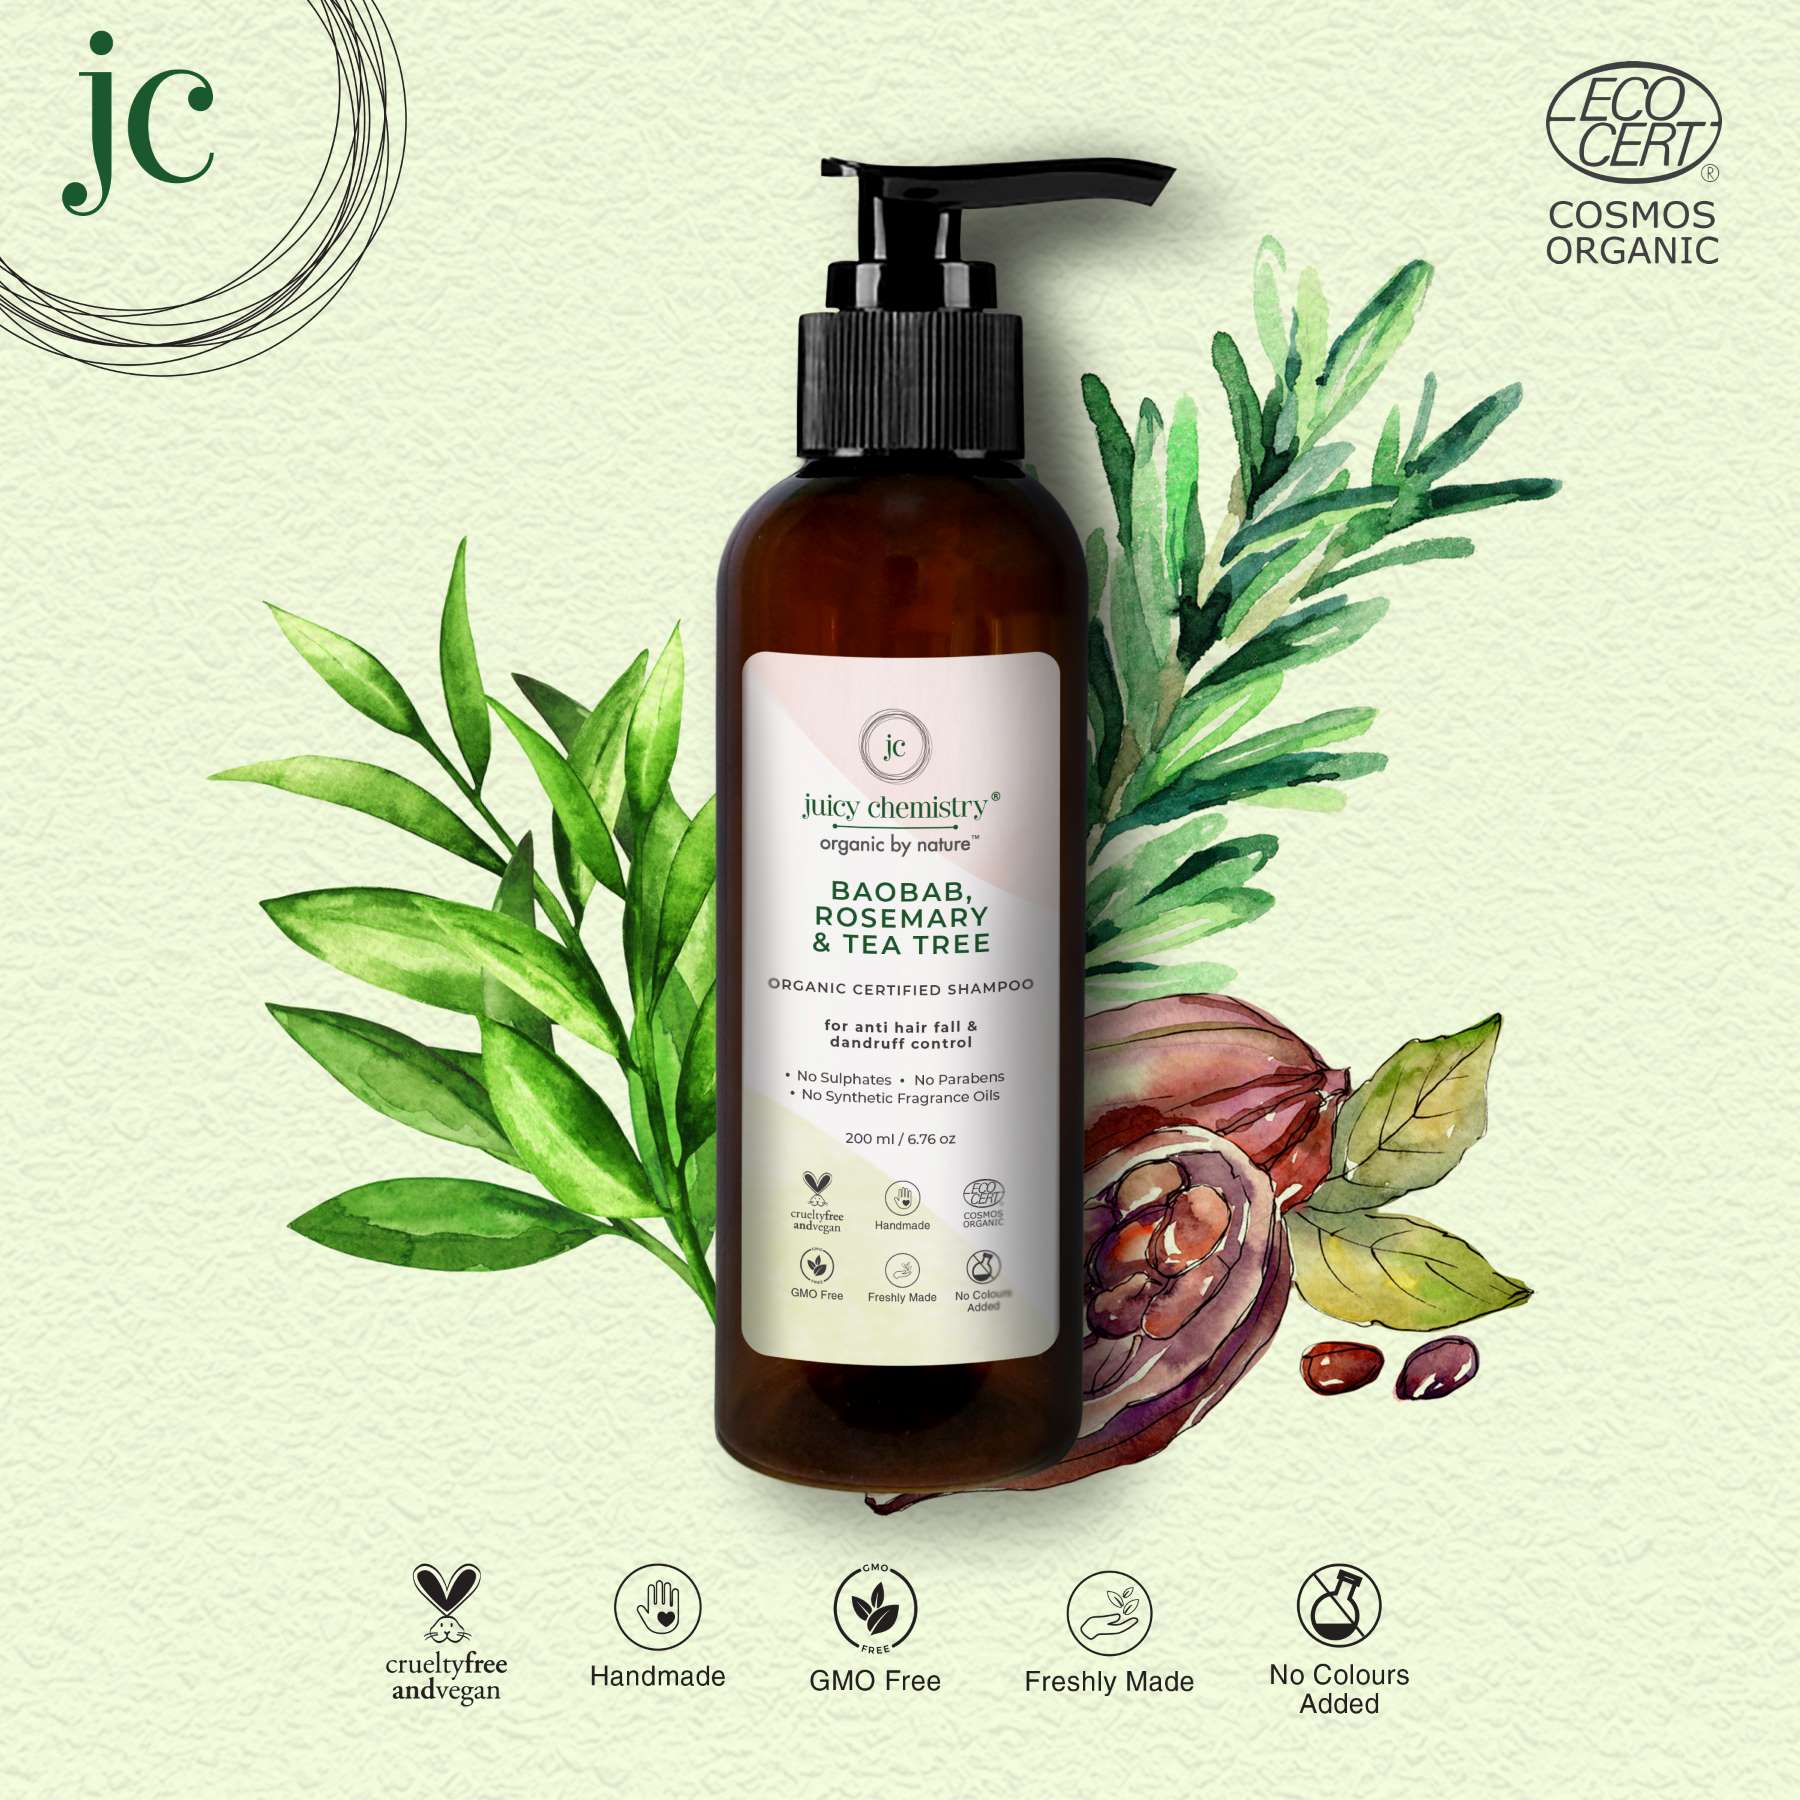 Juicy Chemistry Organic Shampoo for Anti Hair Fall and Dandruff Control with Baobab, Guava Leaf and 